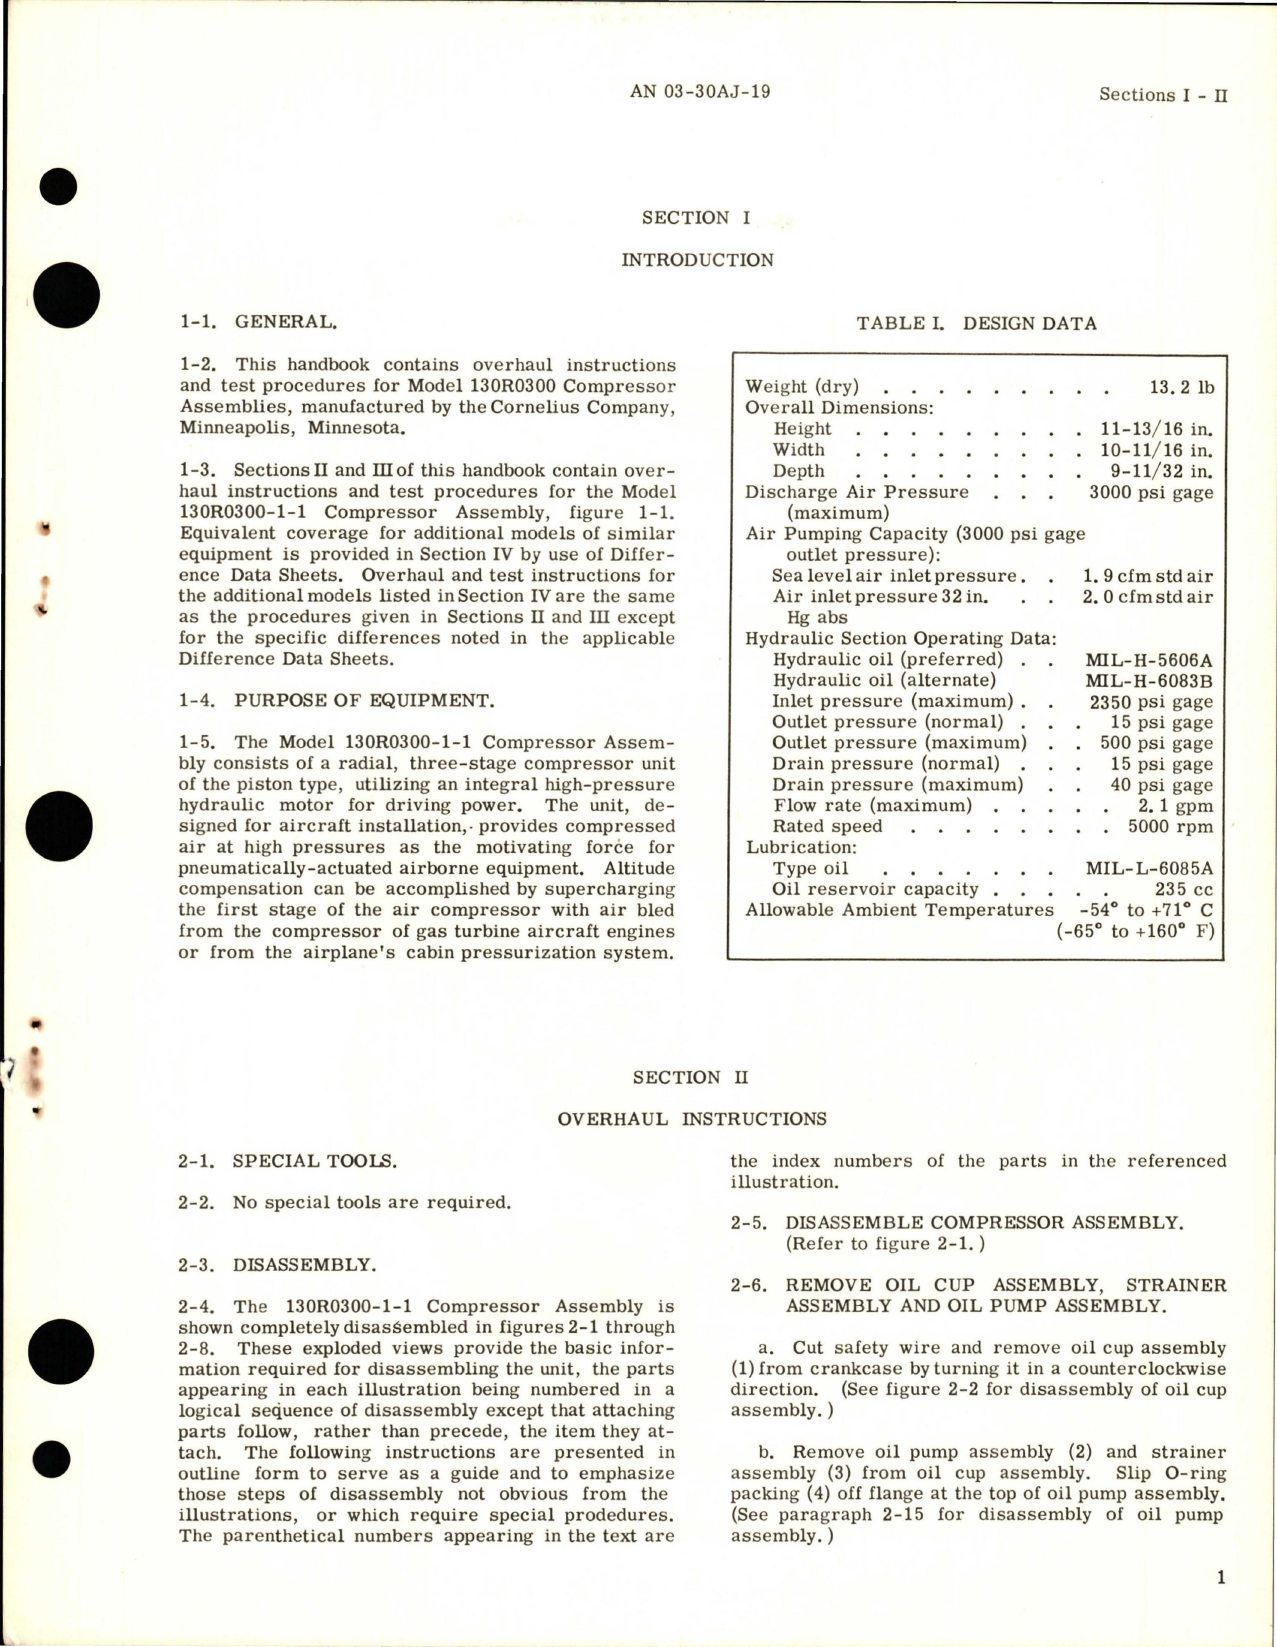 Sample page 5 from AirCorps Library document: Overhaul Instructions for Compressor Assembly